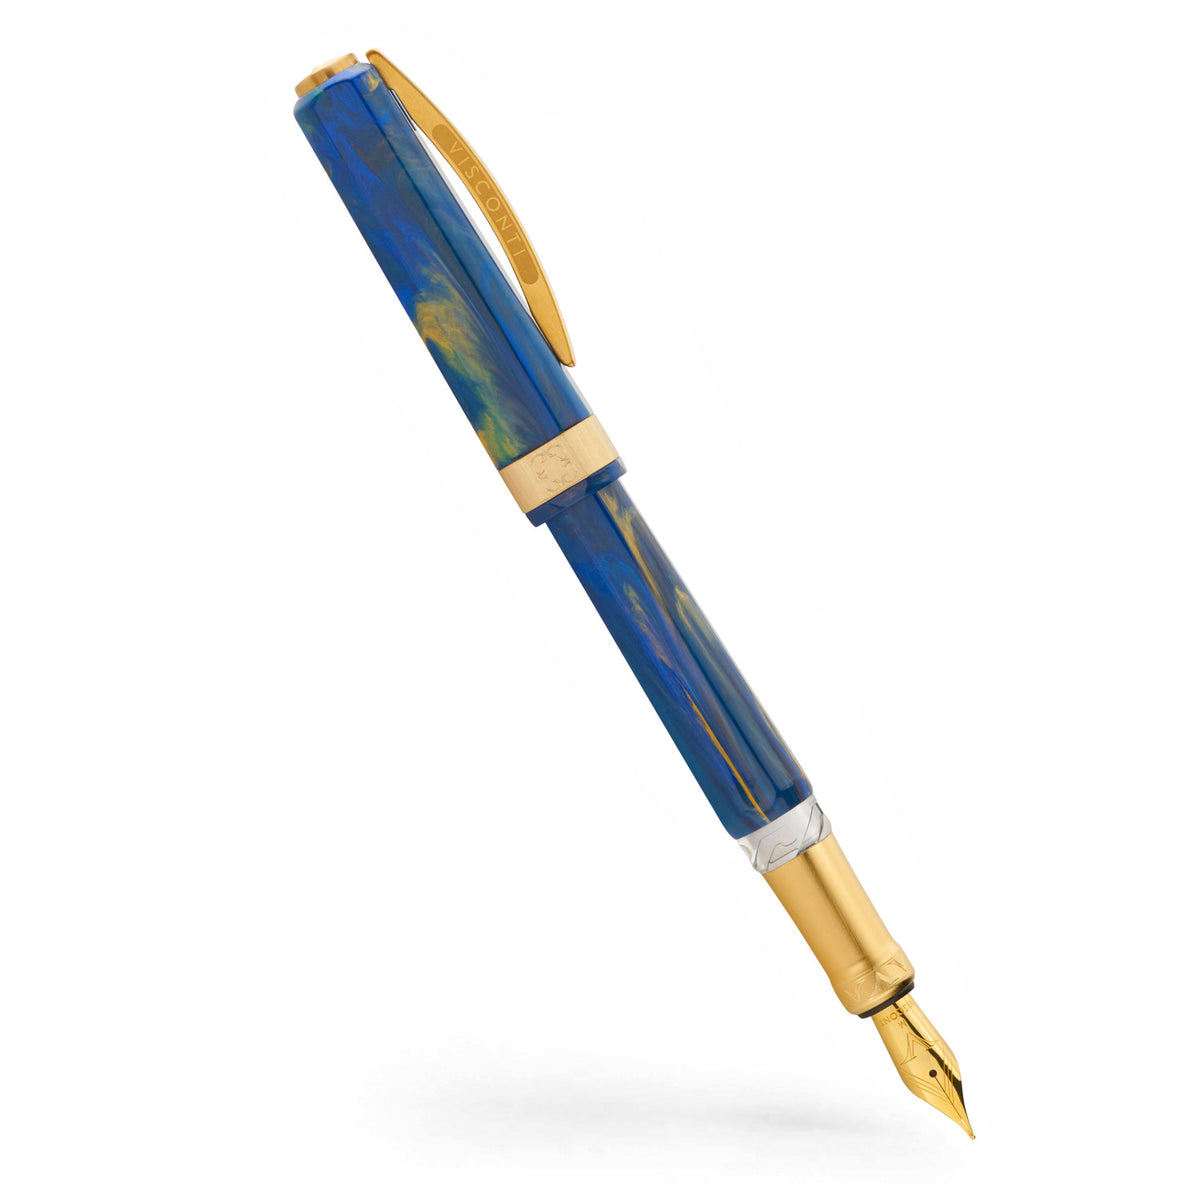 A Coles of London Visconti Opera Gold Blue Fountain Pen on a white background.